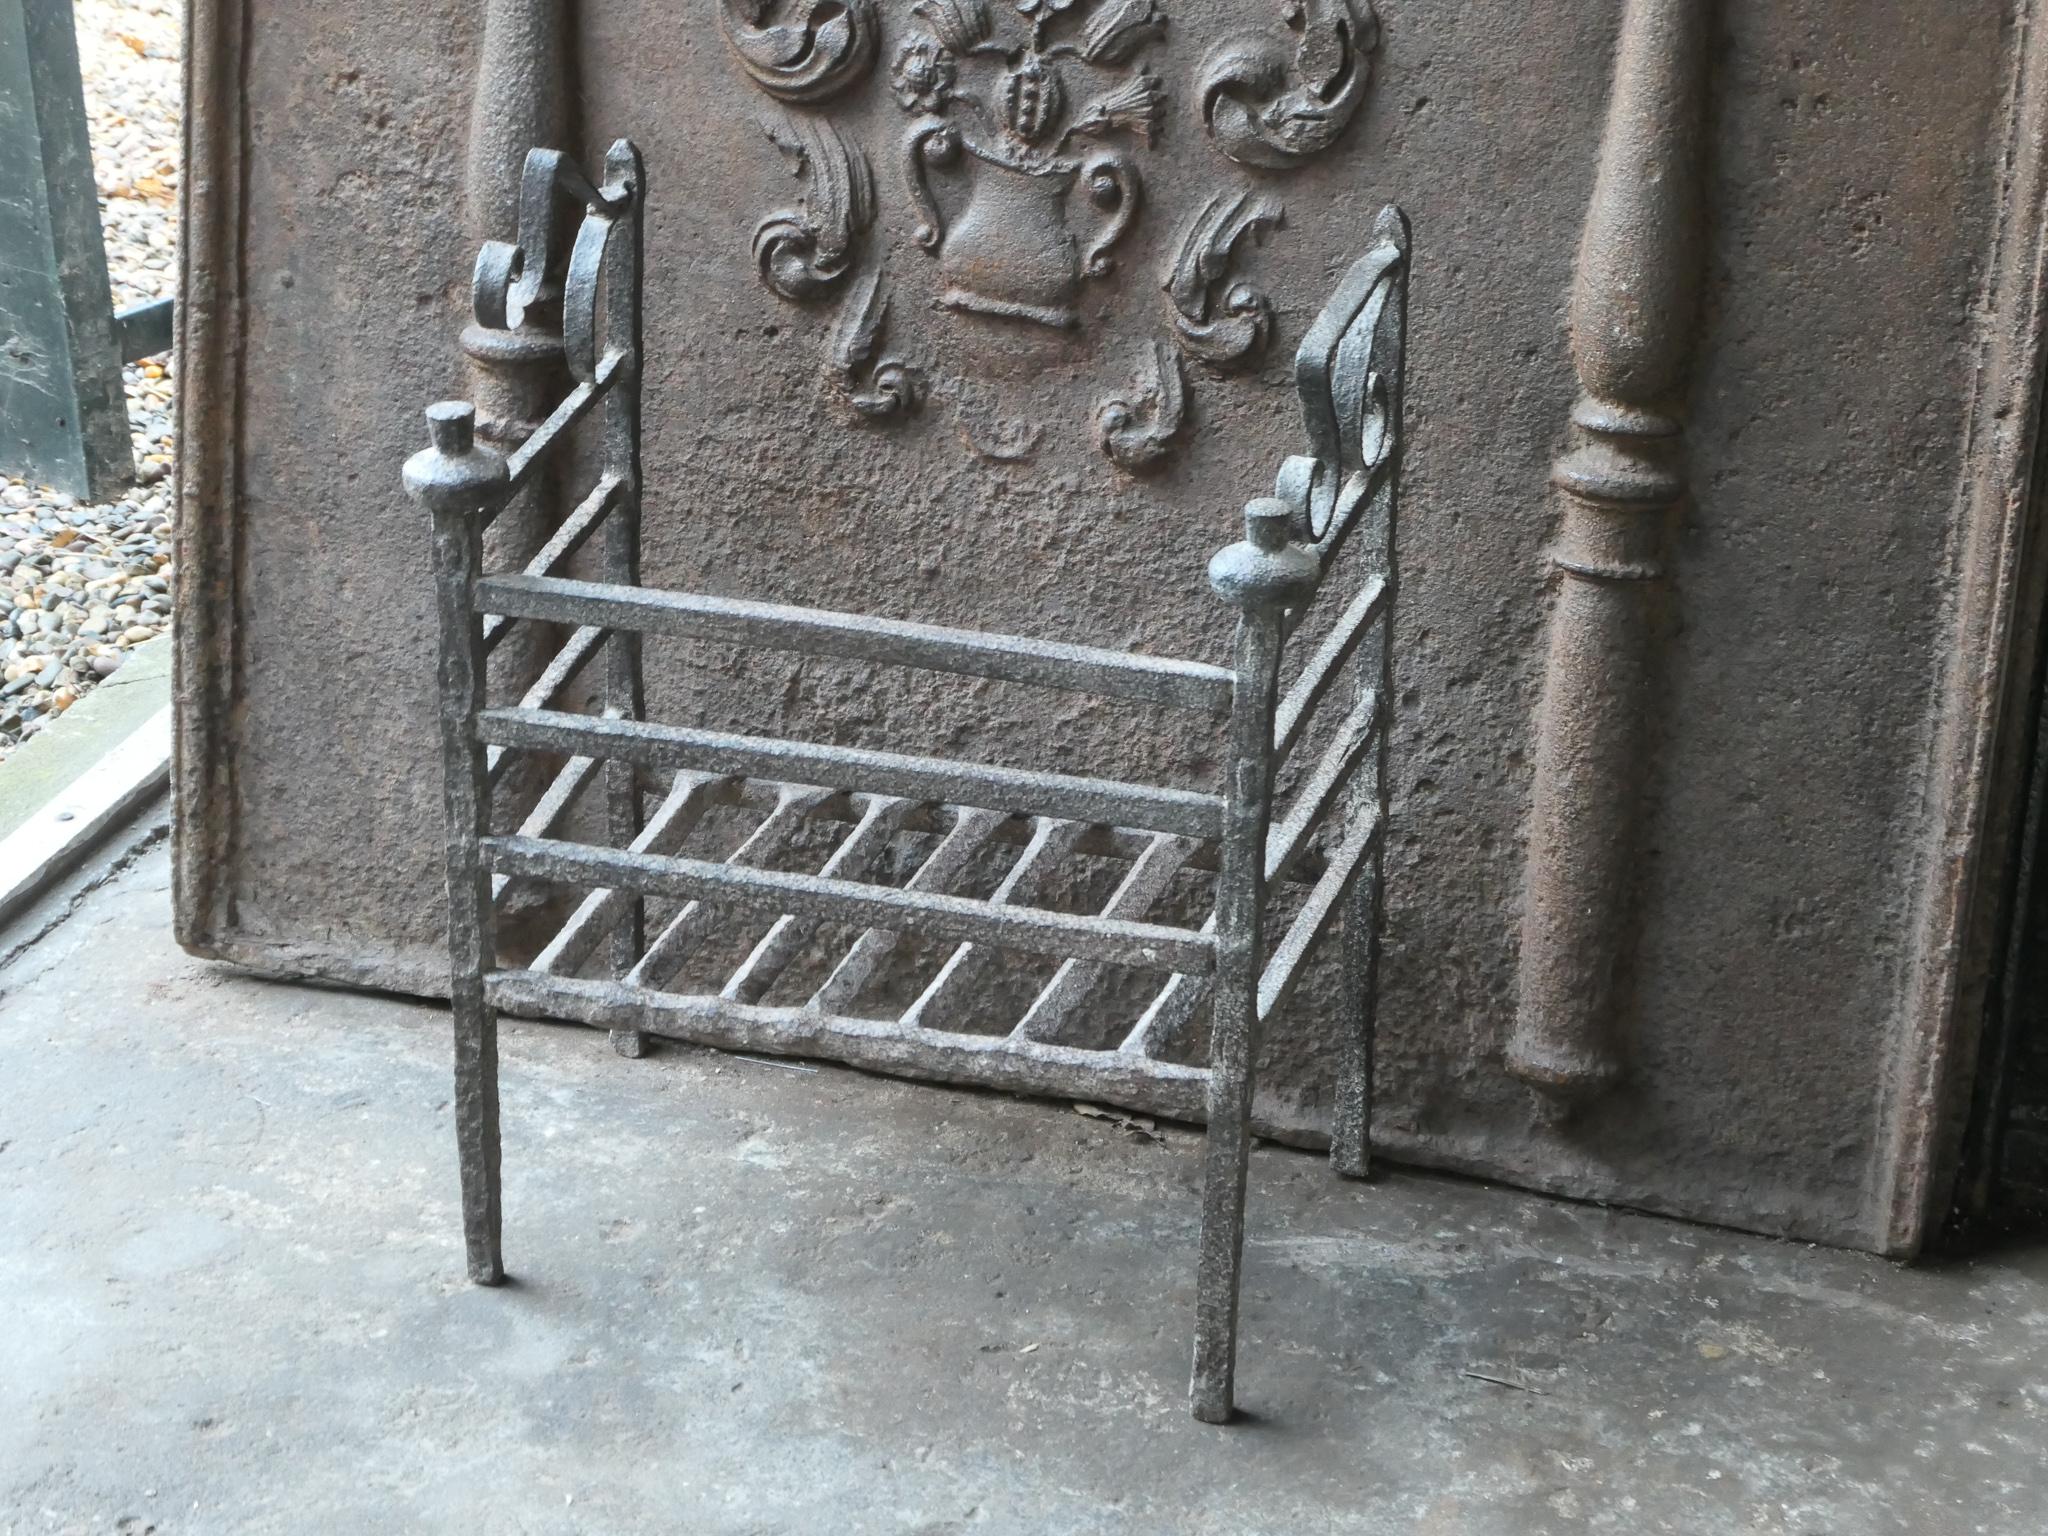 Beautiful 17th century French Gothic fireplace grate. The grate is made of wrought iron. It is in a good condition and fully functional.